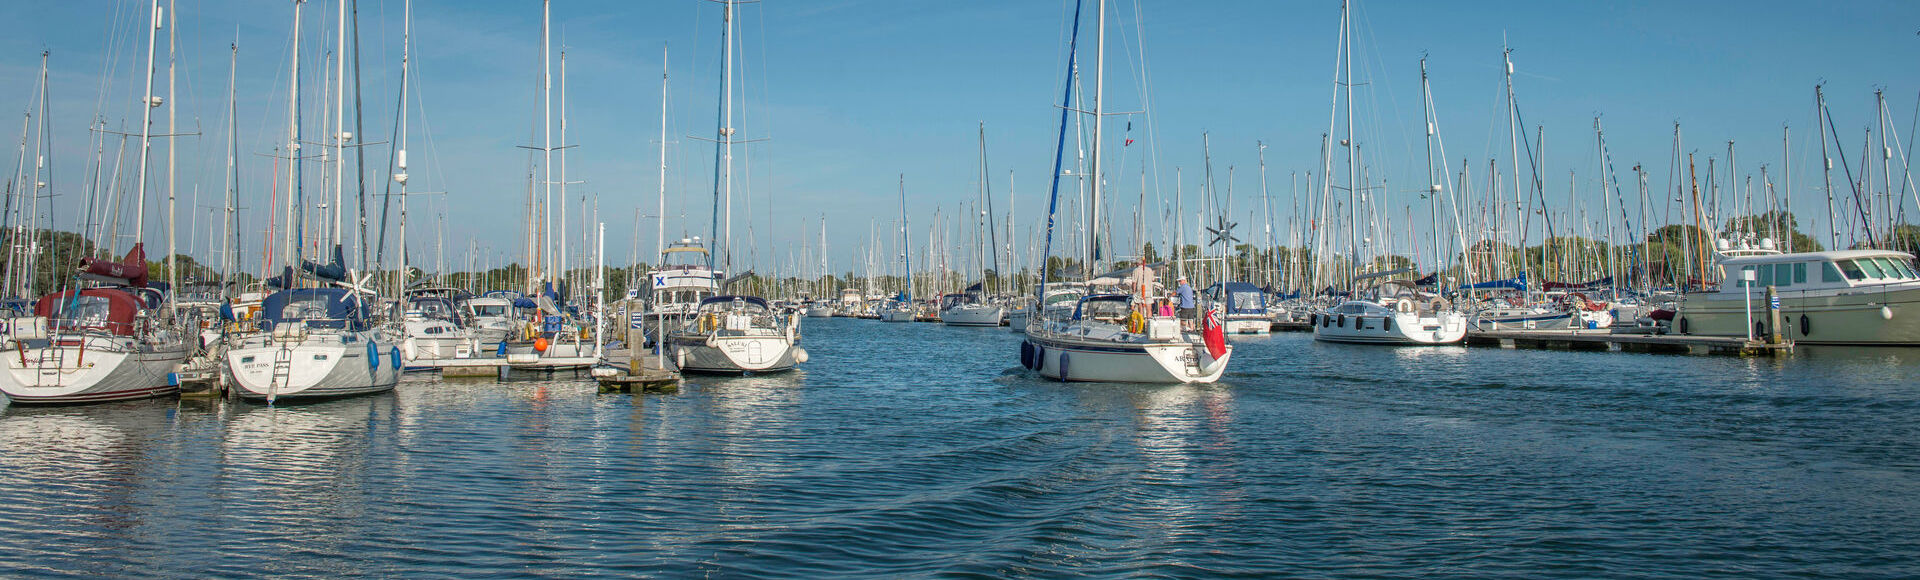 Chichester Marina 2014 09 NW Banner Without Weather 1920X685